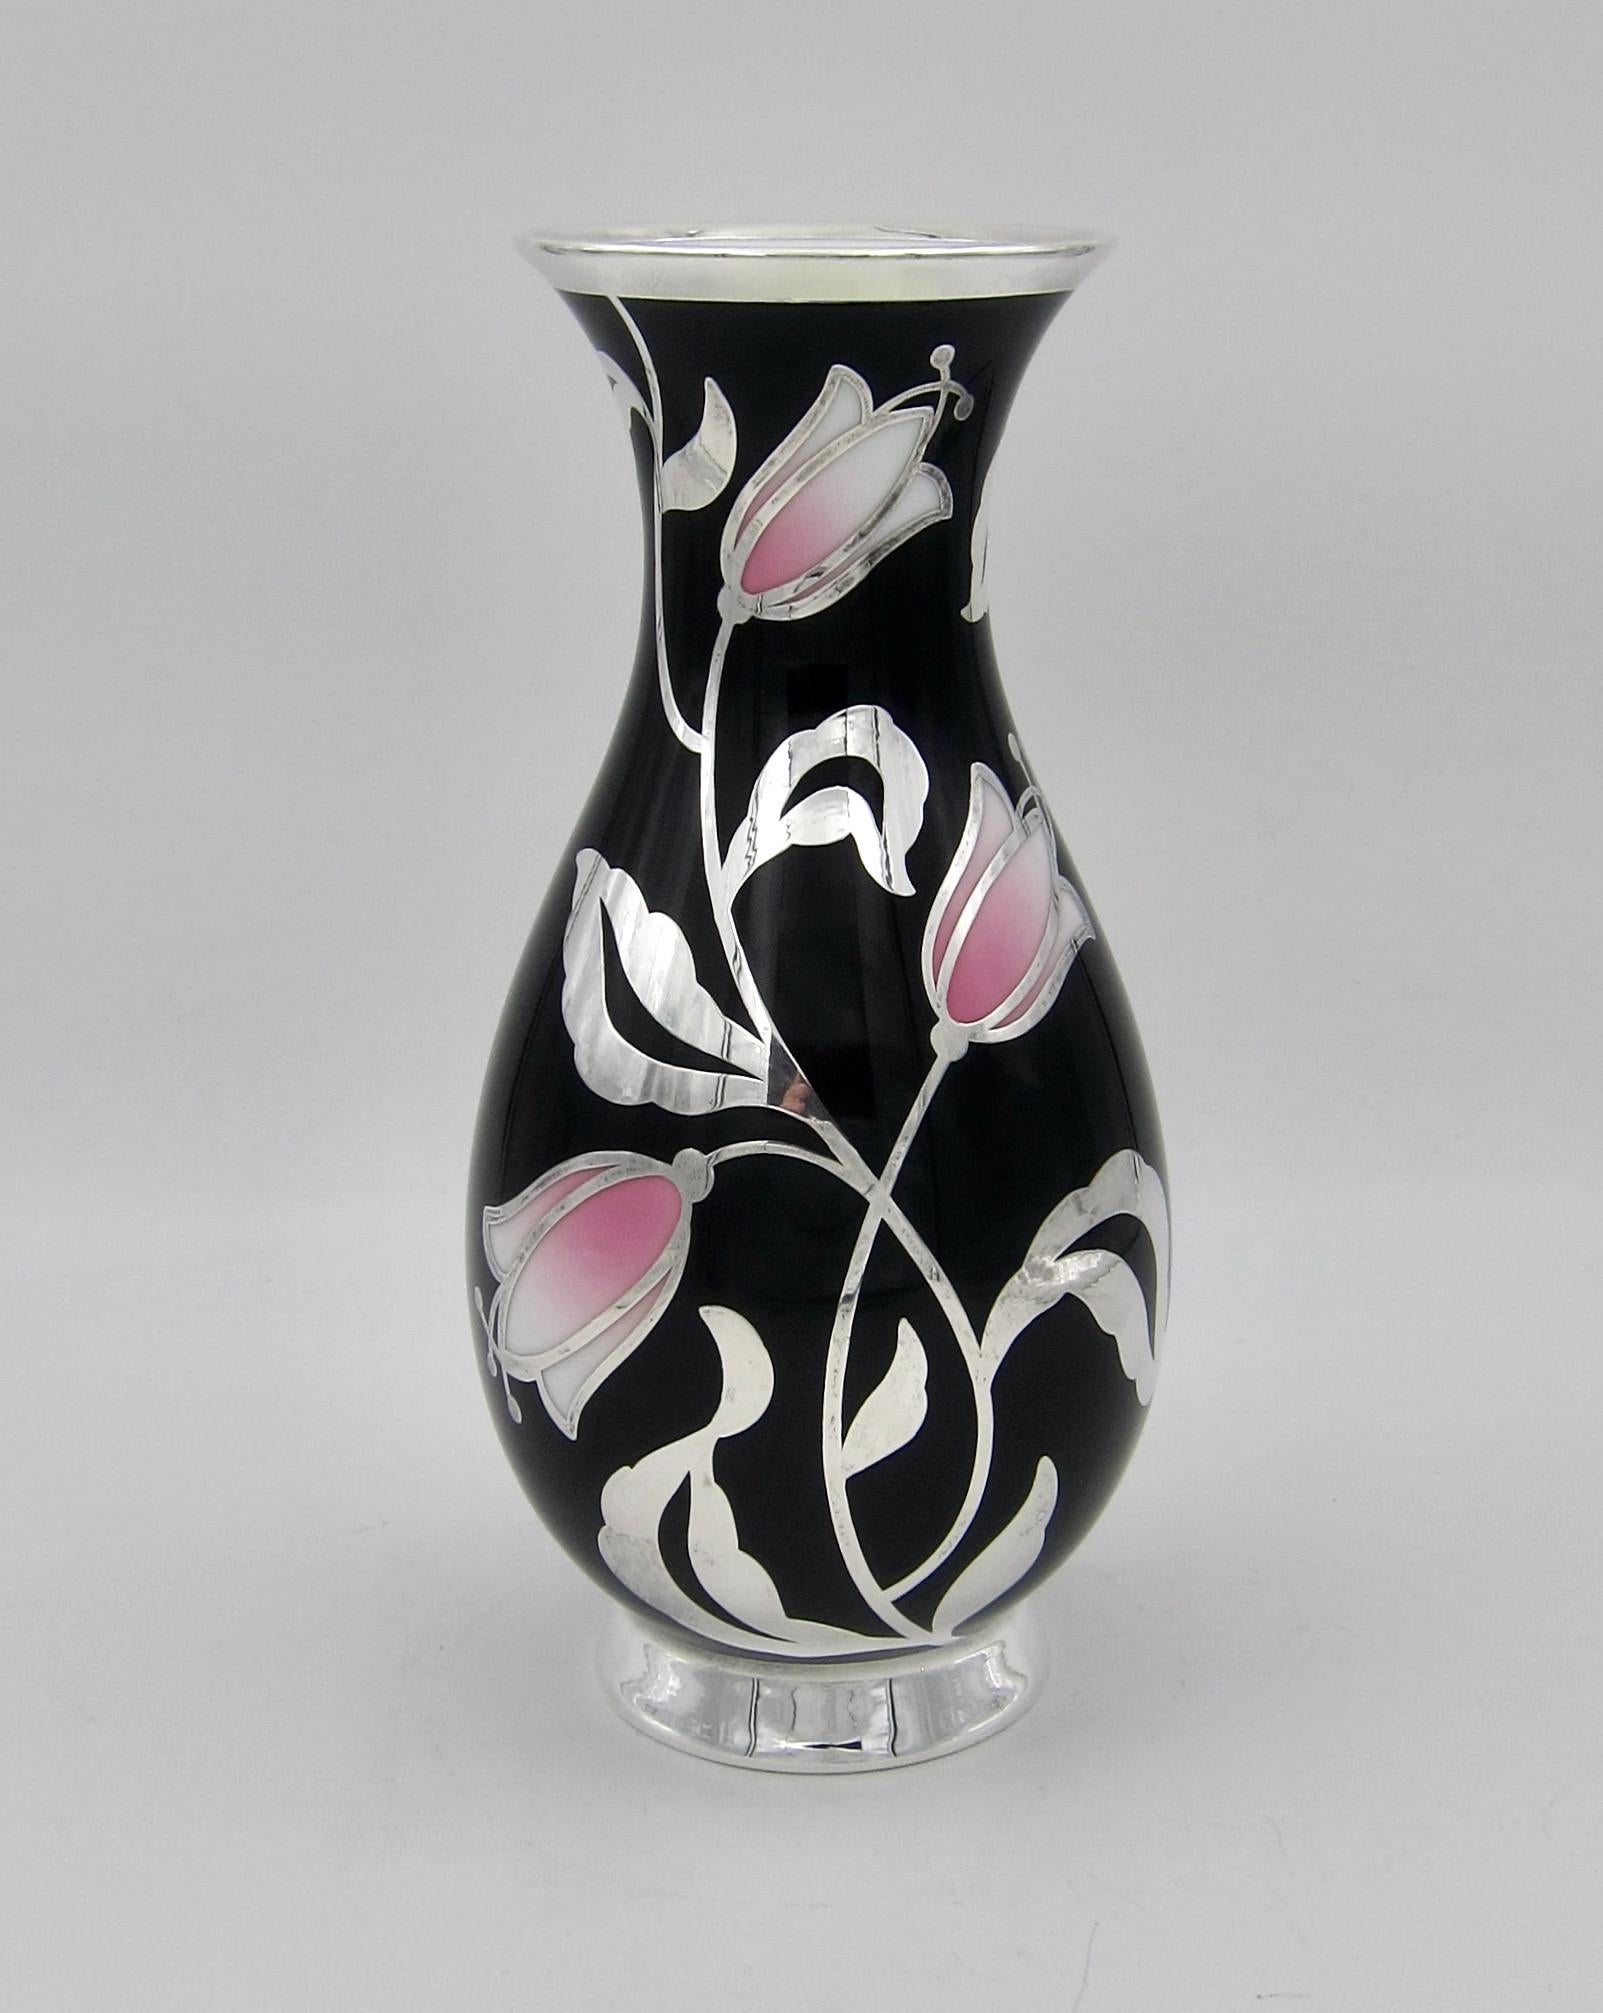 A mid 20th century porcelain vase from the Furstenberg Porcelain Factory with a pure silver overlay by Friedrich Wilhelm Spahr of Germany. The white porcelain body is glazed in black with contrasting tulip blossoms shading from pink to white. The